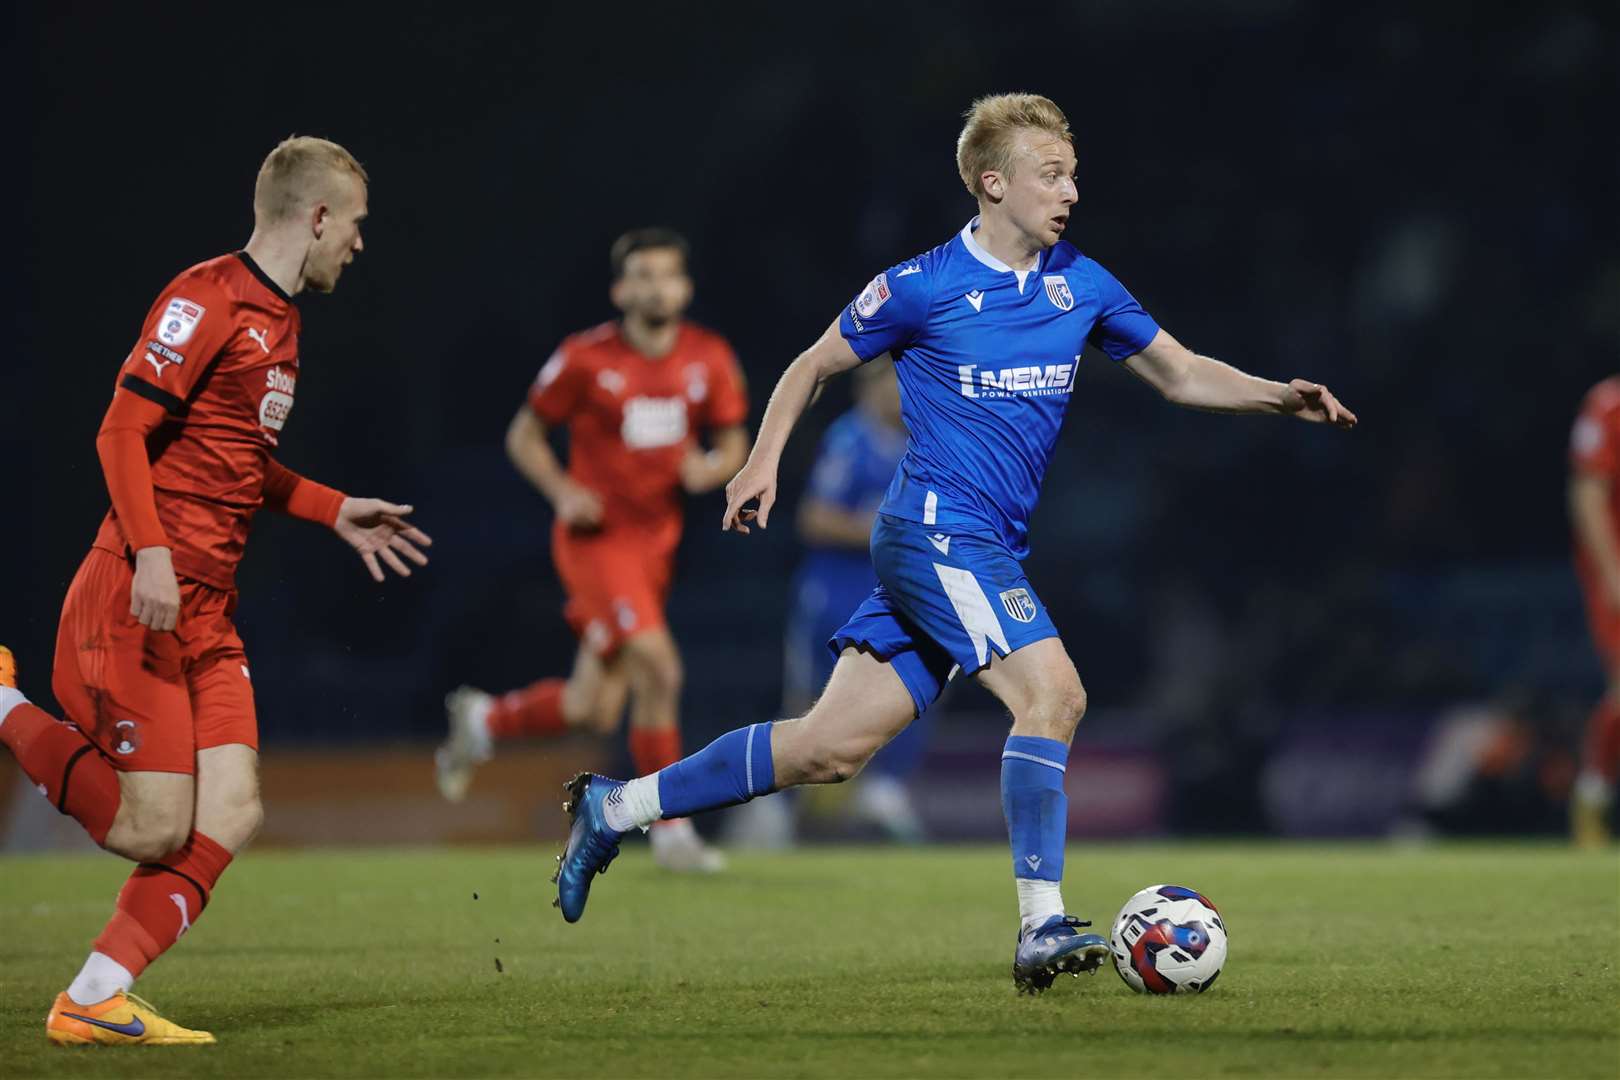 George Lapslie pushing forward for the Gills on Tuesday